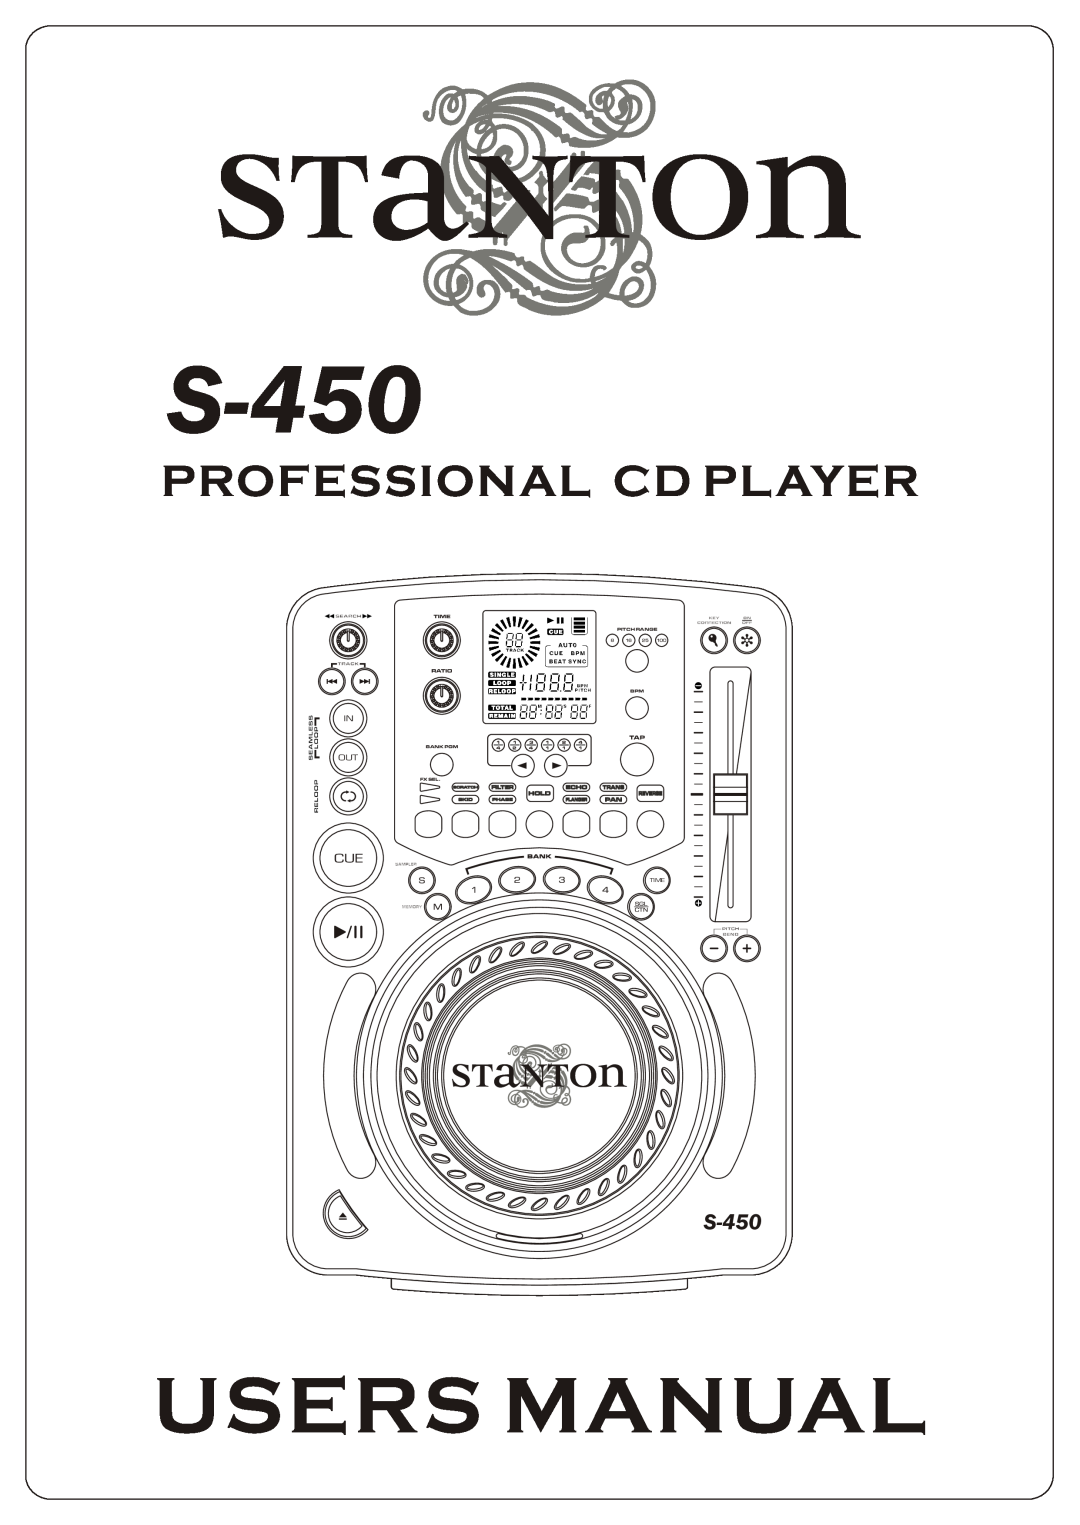 Stanton S-450 user manual Professional Cd Player, Time, Ratio, Filter, Echo, Trans, Hold, Flanger, Pitch Range, Bank Pgm 